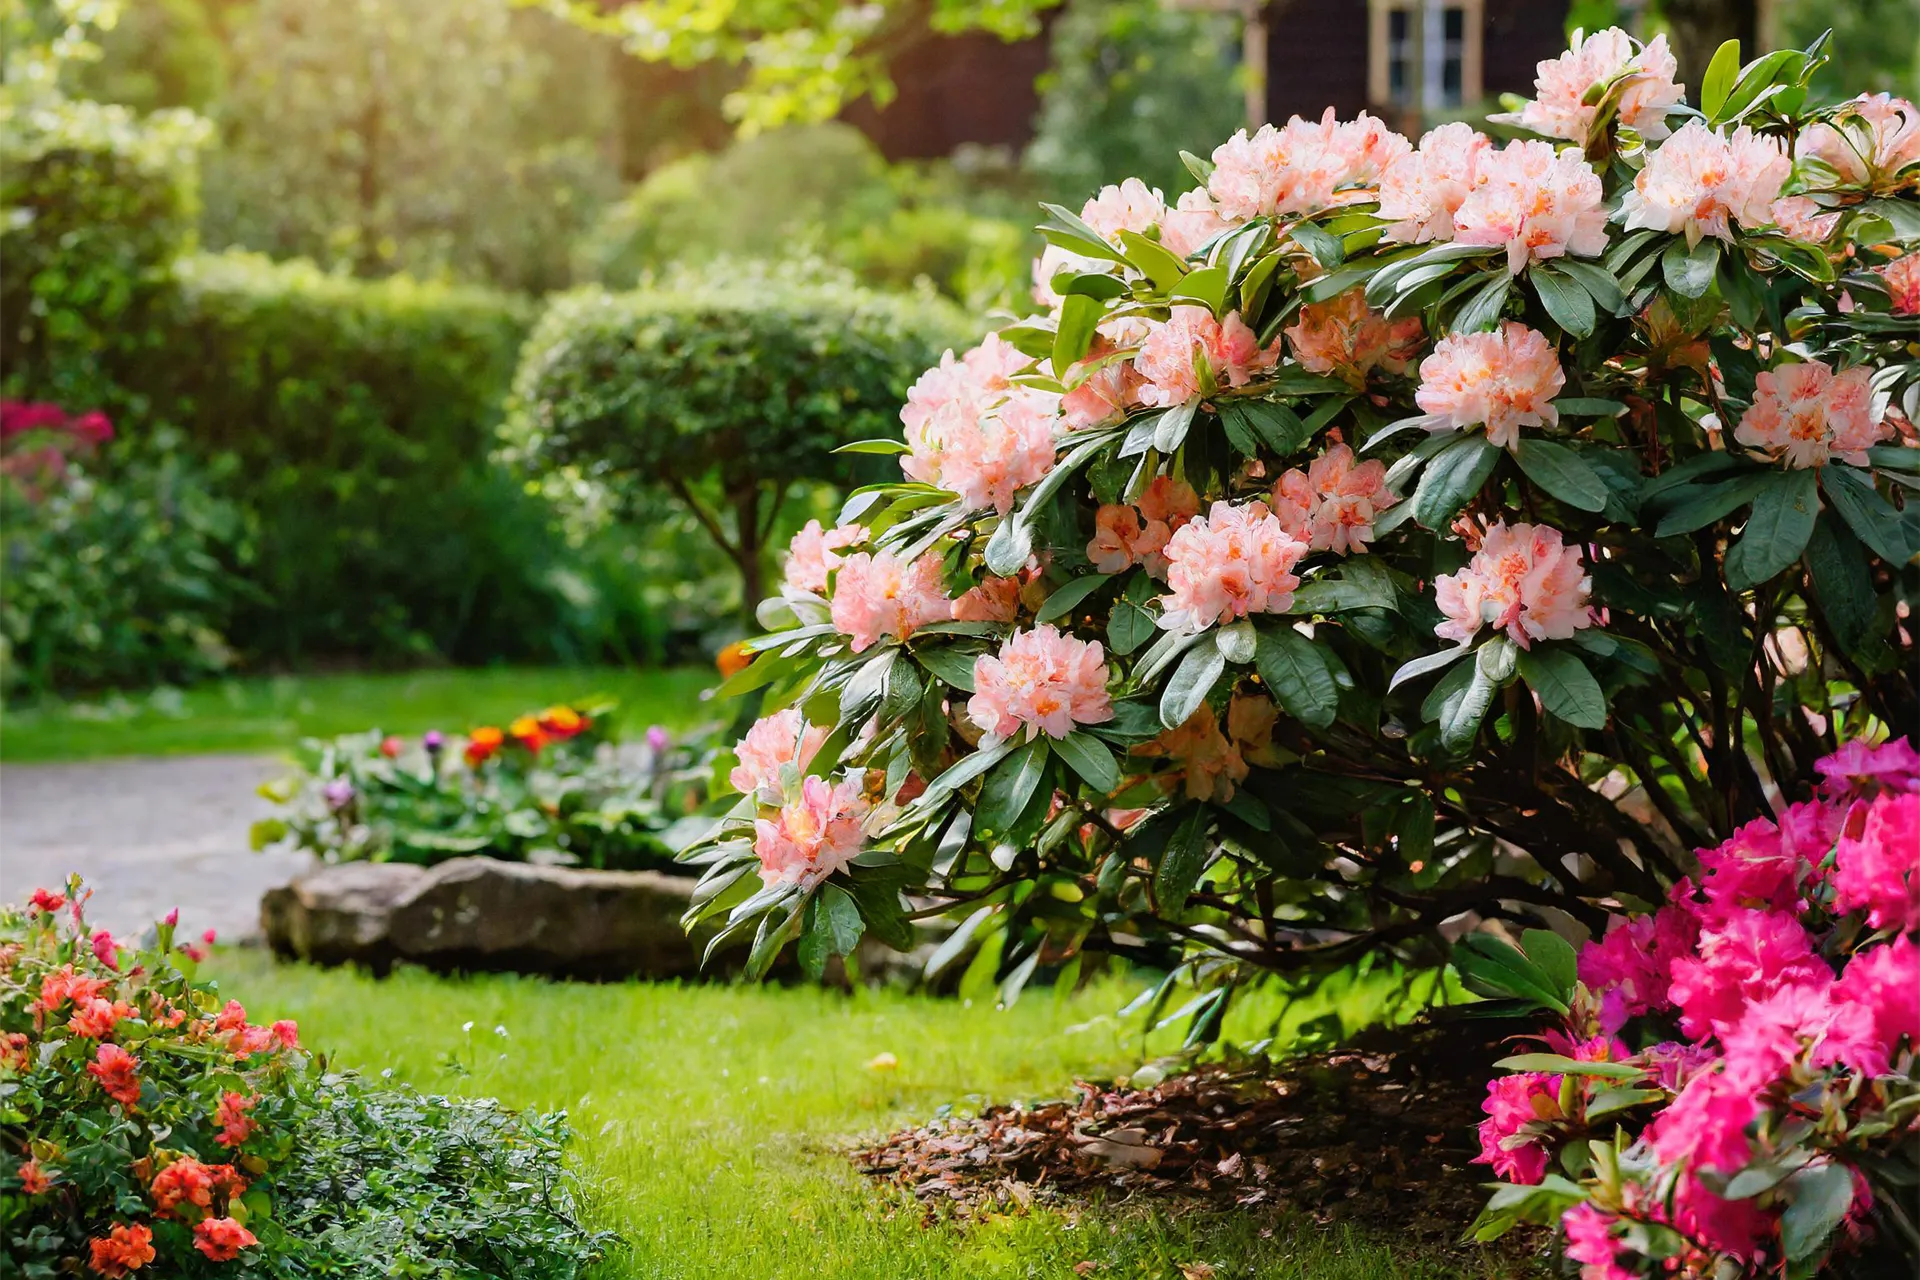 Rhododendron bush which is an evergreen plant with peach flowers growing in a backyard surrounded by other flowering plants in pinks and corals.